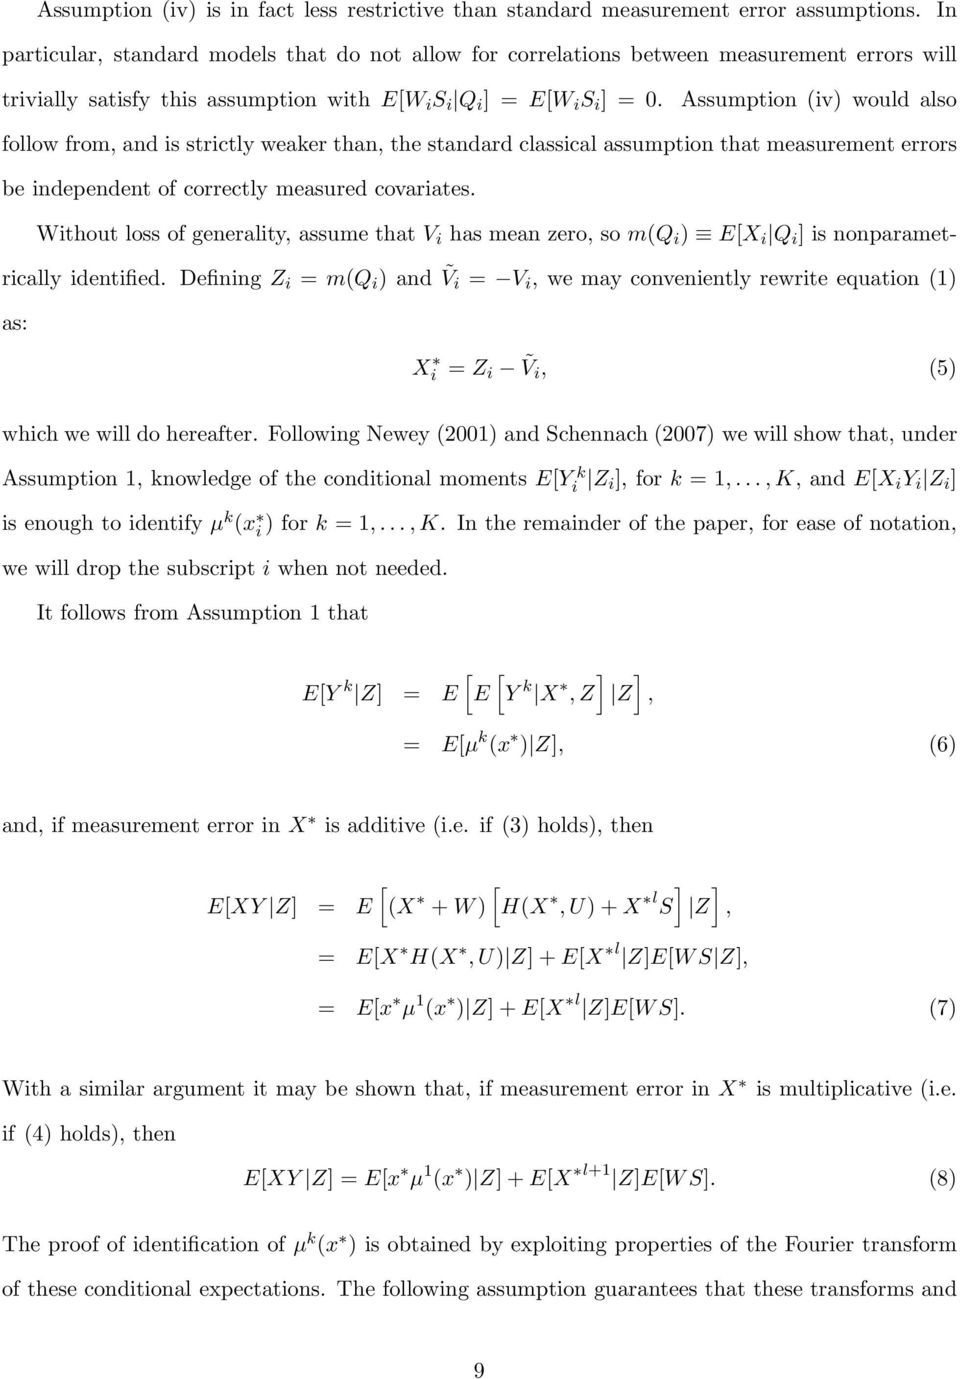 Assumption (iv) would also follow from, and is strictly weaker than, the standard classical assumption that measurement errors be independent of correctly measured covariates.